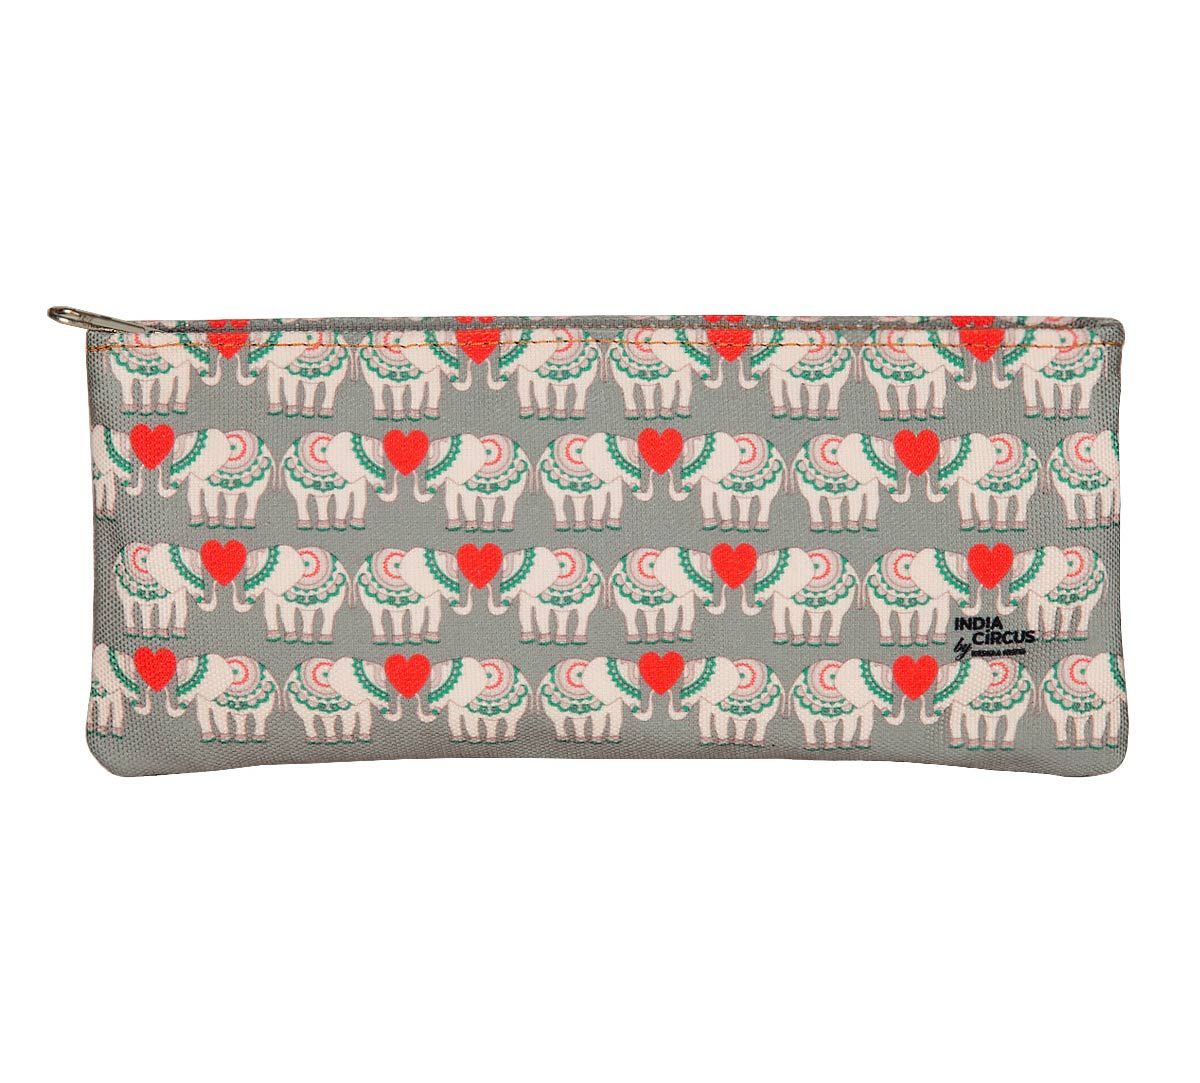 India Circus Heart Tusker Small Utility Pouch